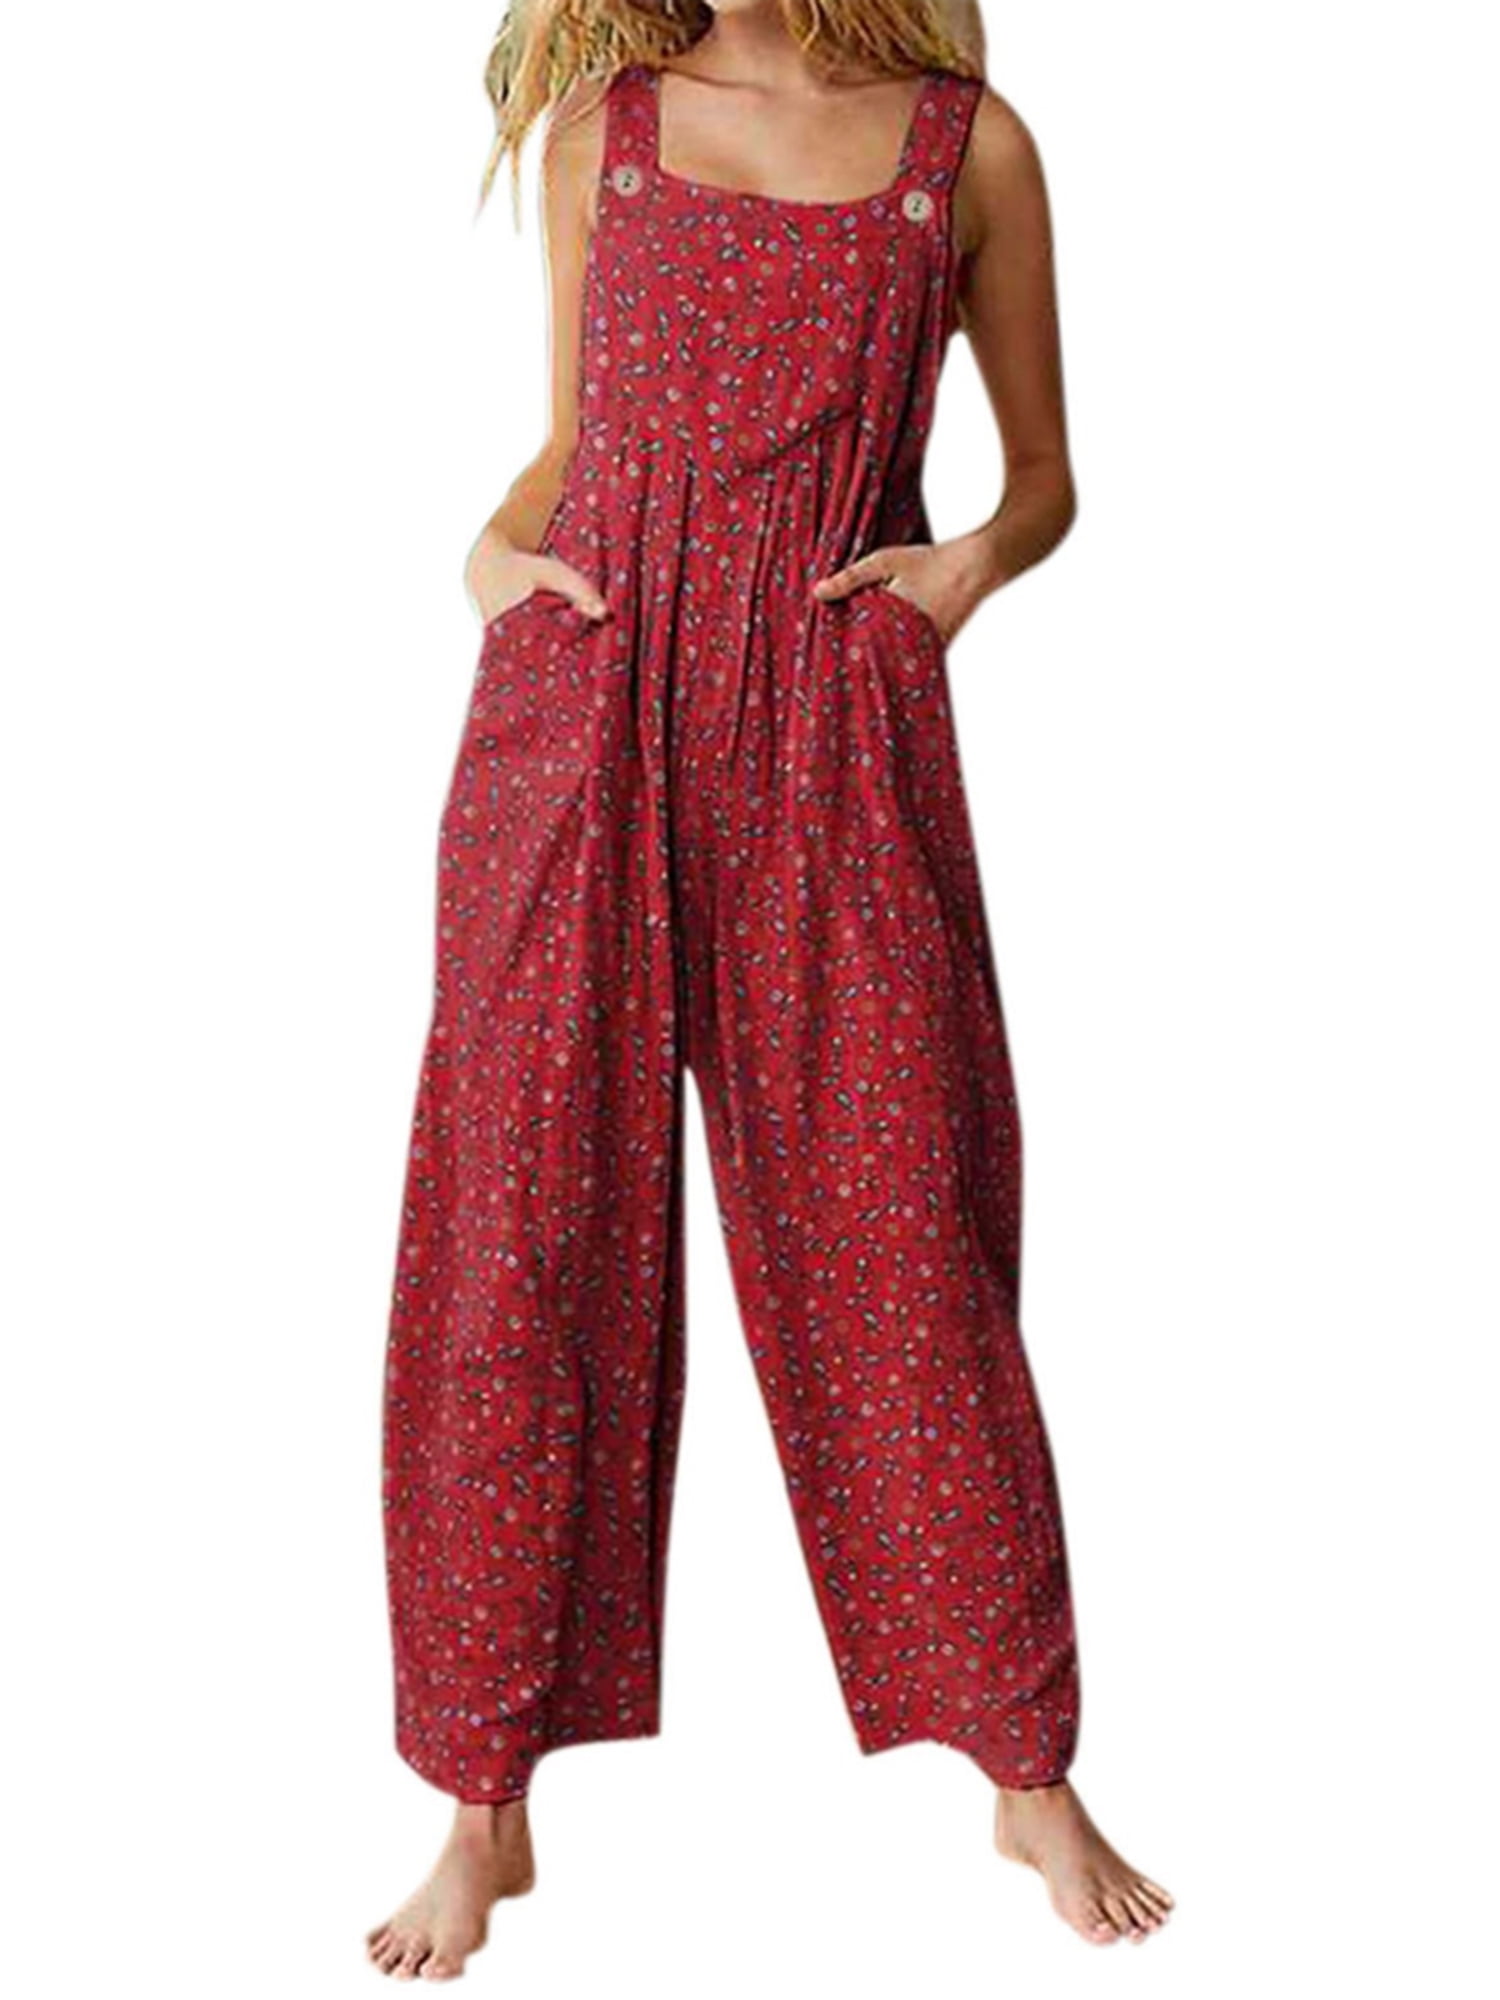 Coolred-Women Colorful Printed Hip Hop Wide Leg Overalls Bib Playsuit